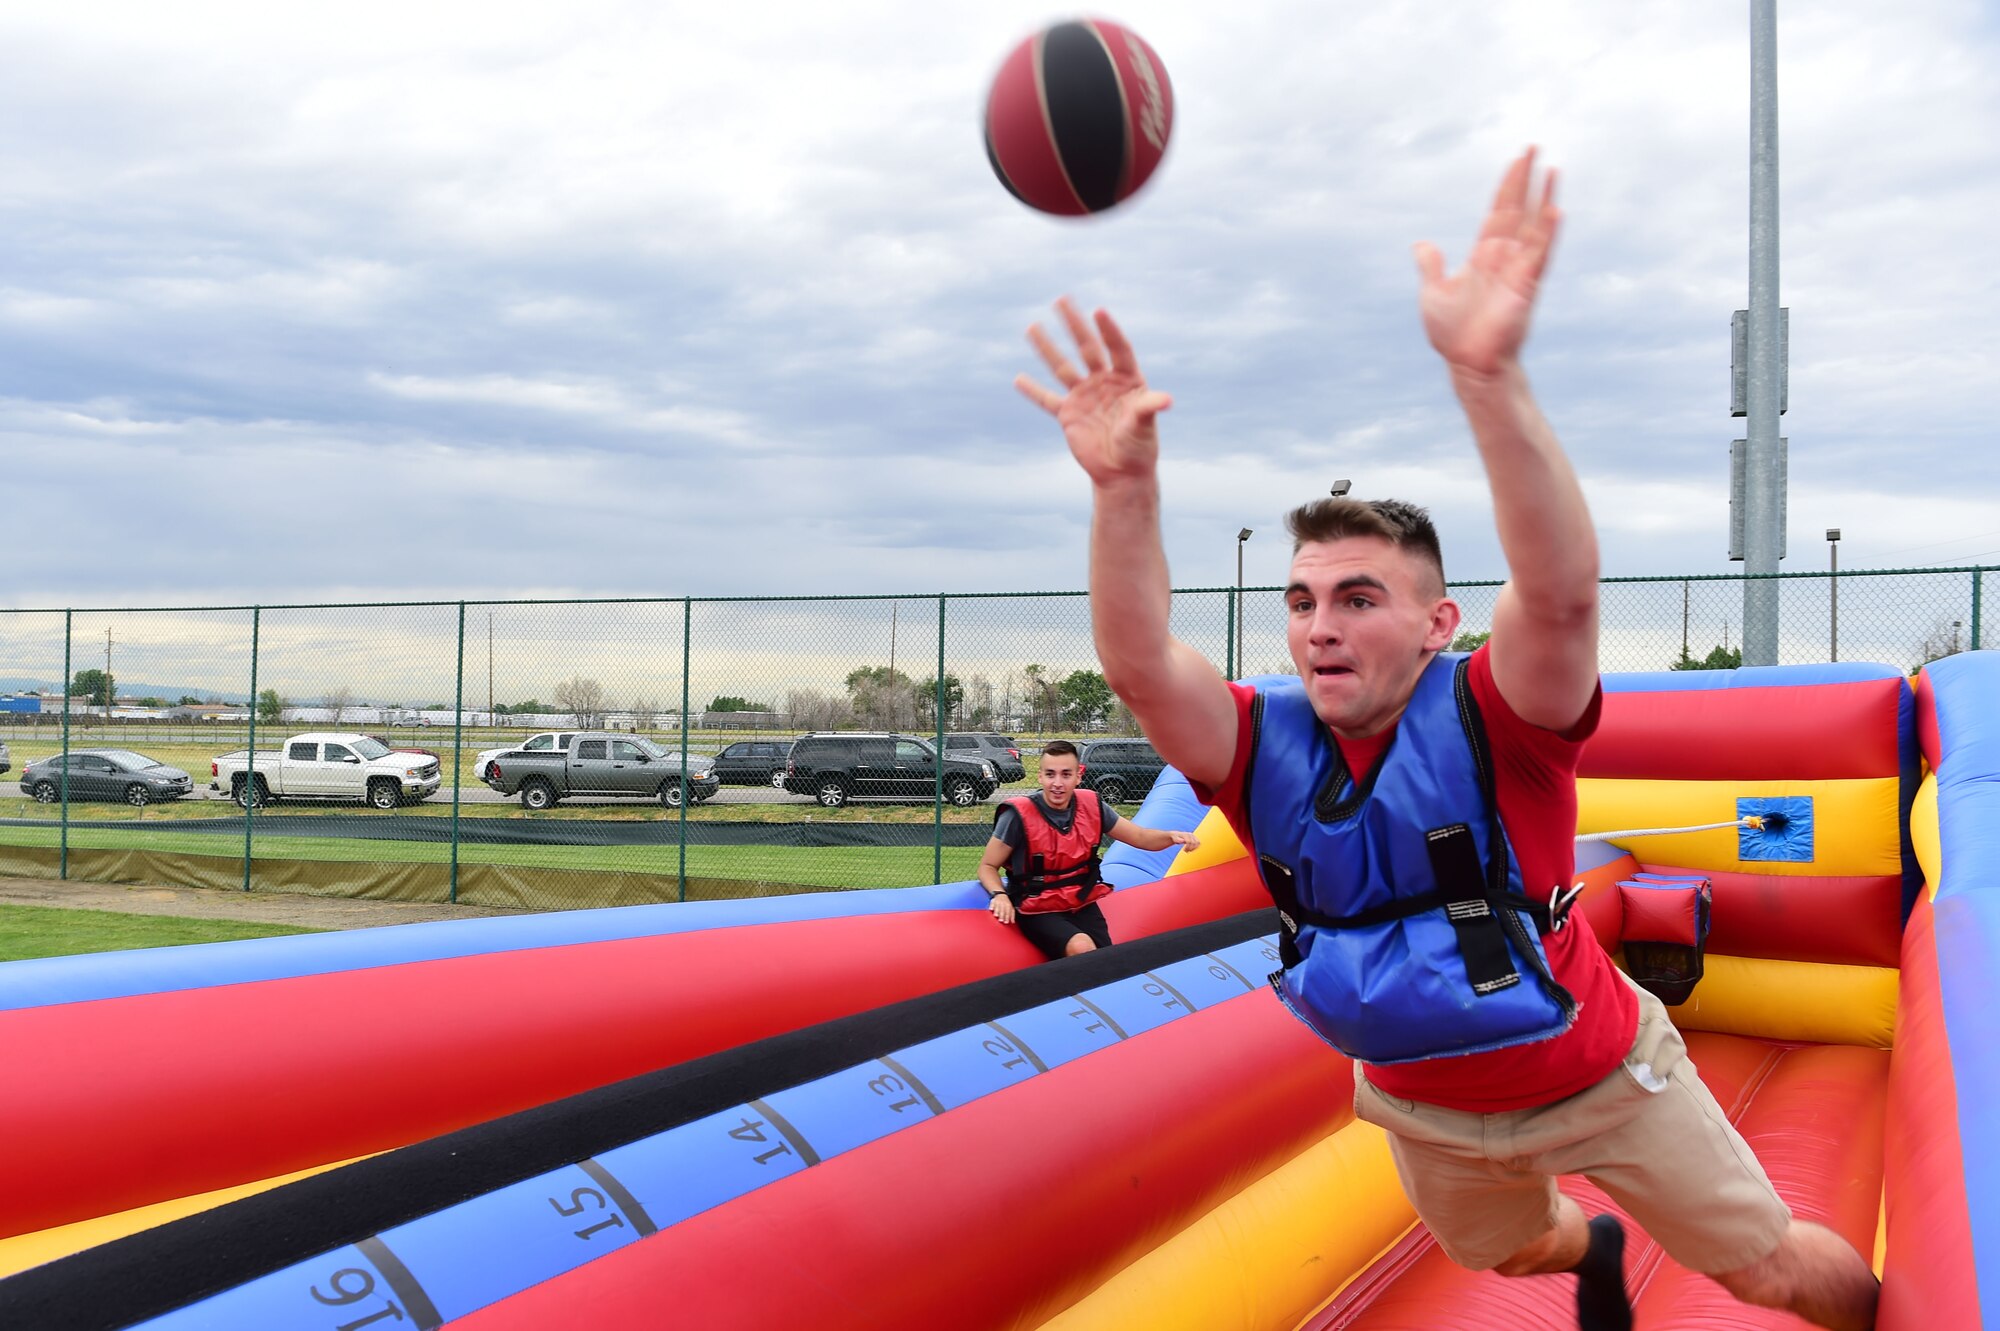 Airman 1st Class Dakota Osborne, 2nd Space Warning Squadron space systems operator, tries to make a basket during FunFest July 24, 2015, at Buckley Air Force Base, Colo. FunFest is an annual base-wide event that includes family-friendly games and activities, community involvement and local business sponsors. (U.S. Air Force photo by Airman 1st Class Luke W. Nowakowski/Released) 